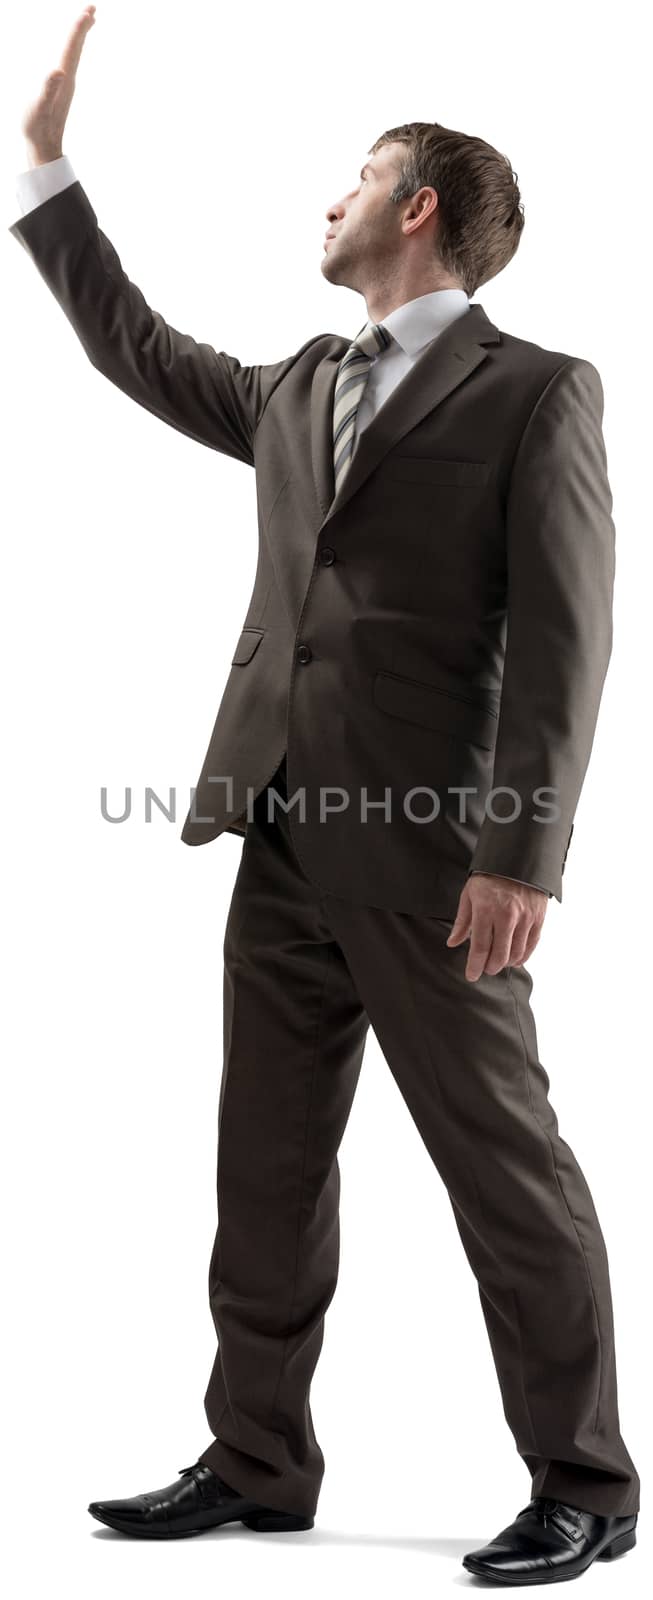 Businessman protecting himself with hand up in defensive position isolated on white background